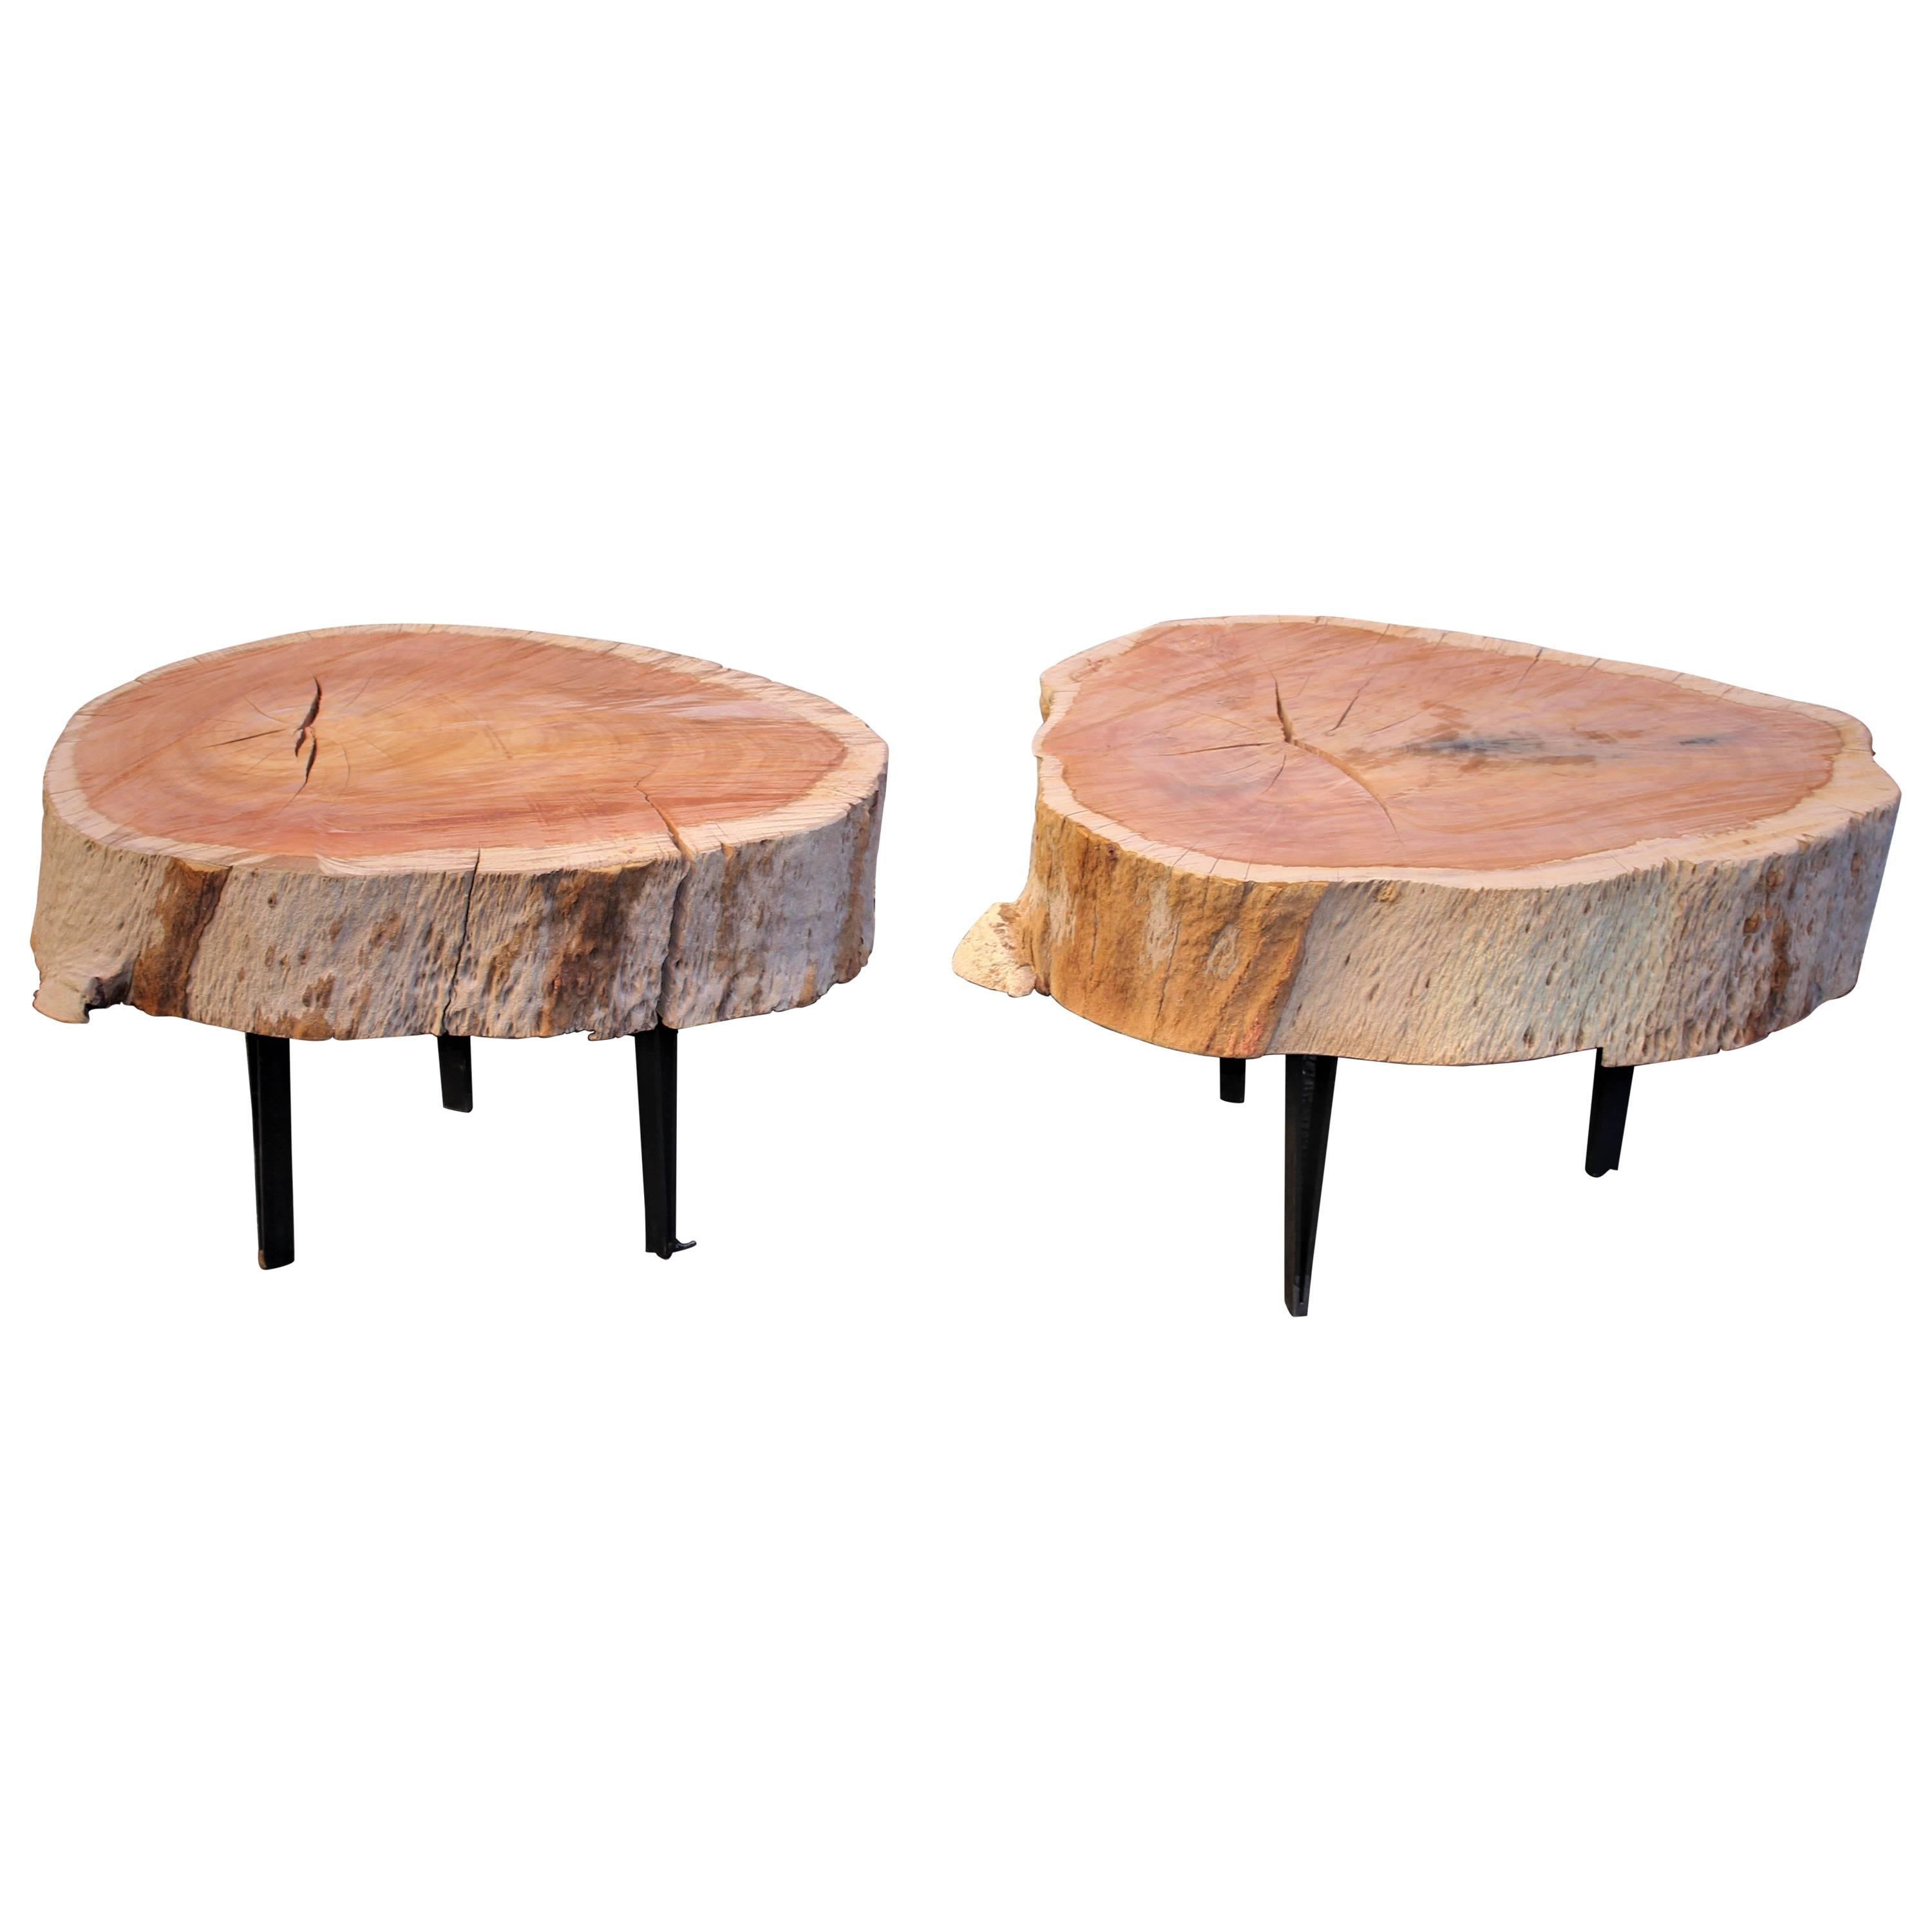 Side Tables by ACA Studio